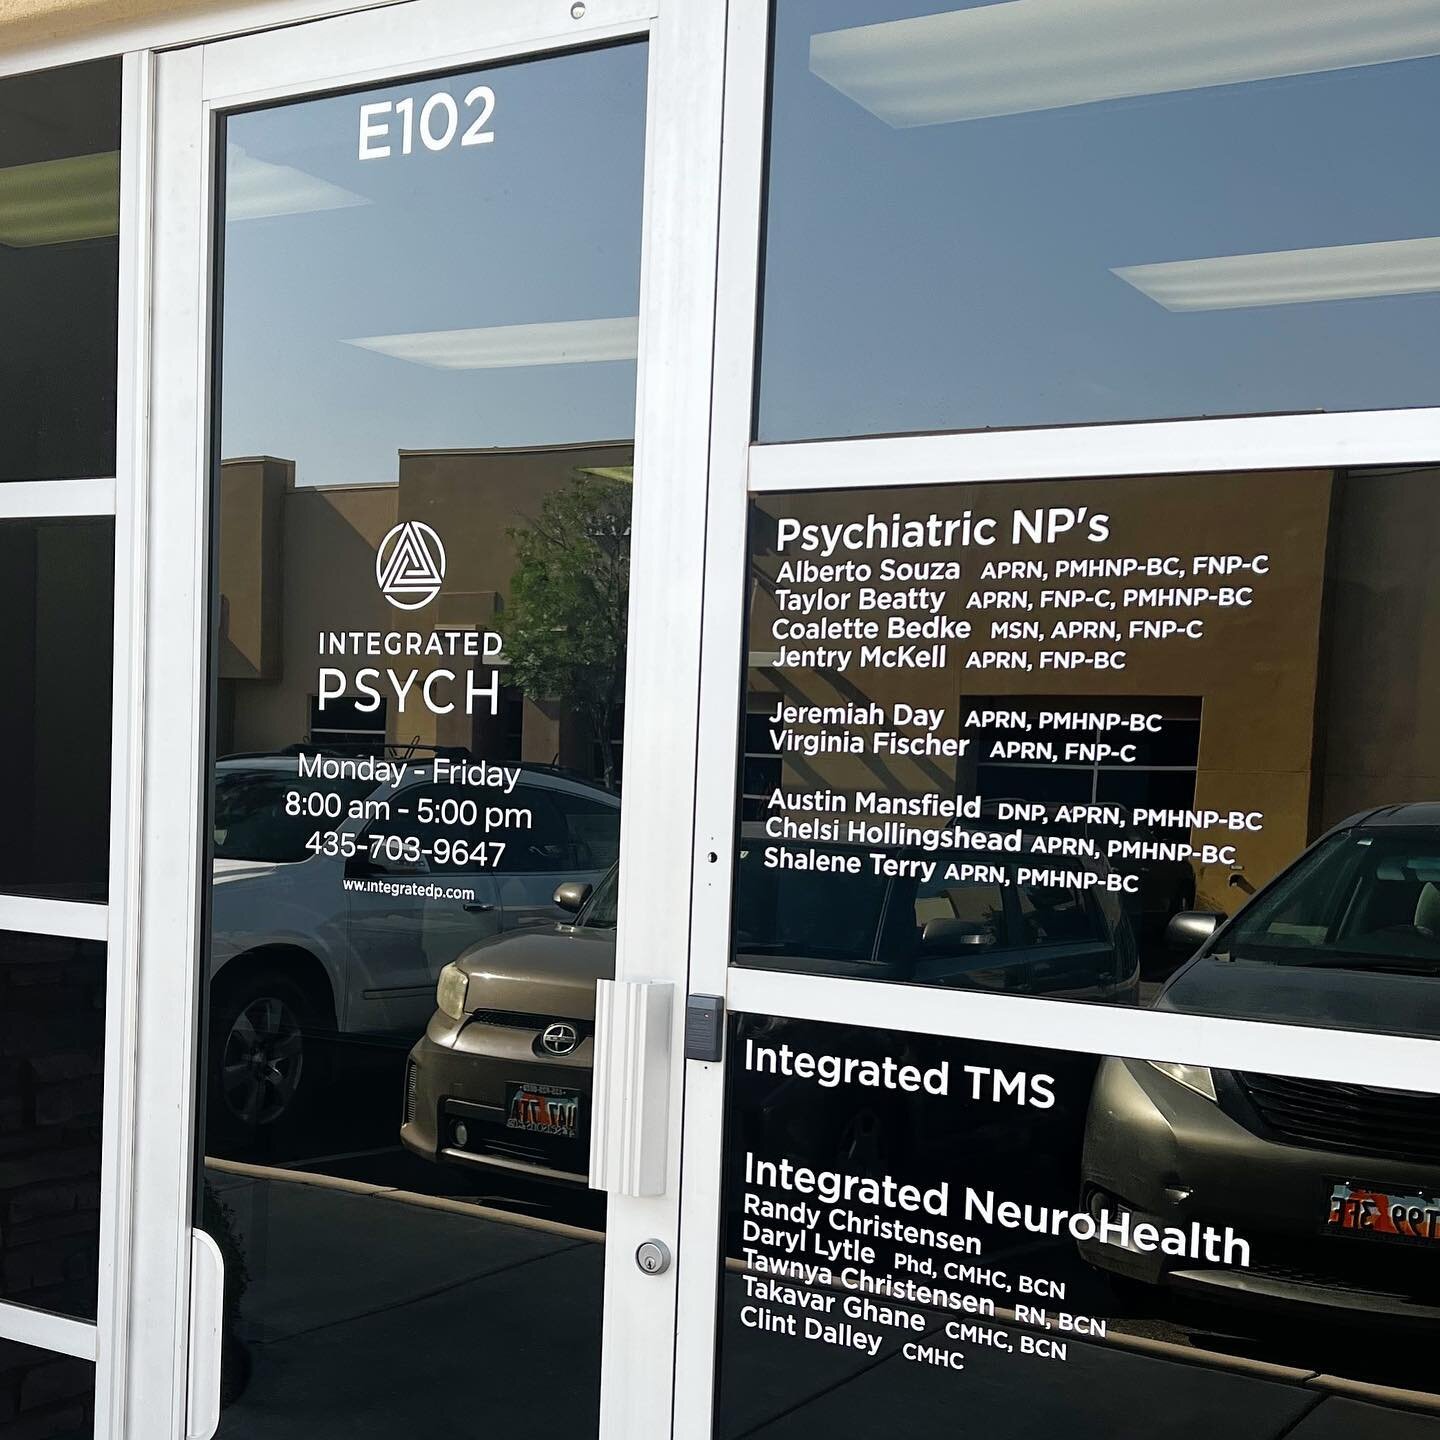 When you are coming for your appointment at Integrated Psych in St. George, look for Suite E102. We&rsquo;ve added the suite number to our front door. If you are seeing a provider for Medication management, TMS, Spravato or Neurofeedback&hellip;Suite